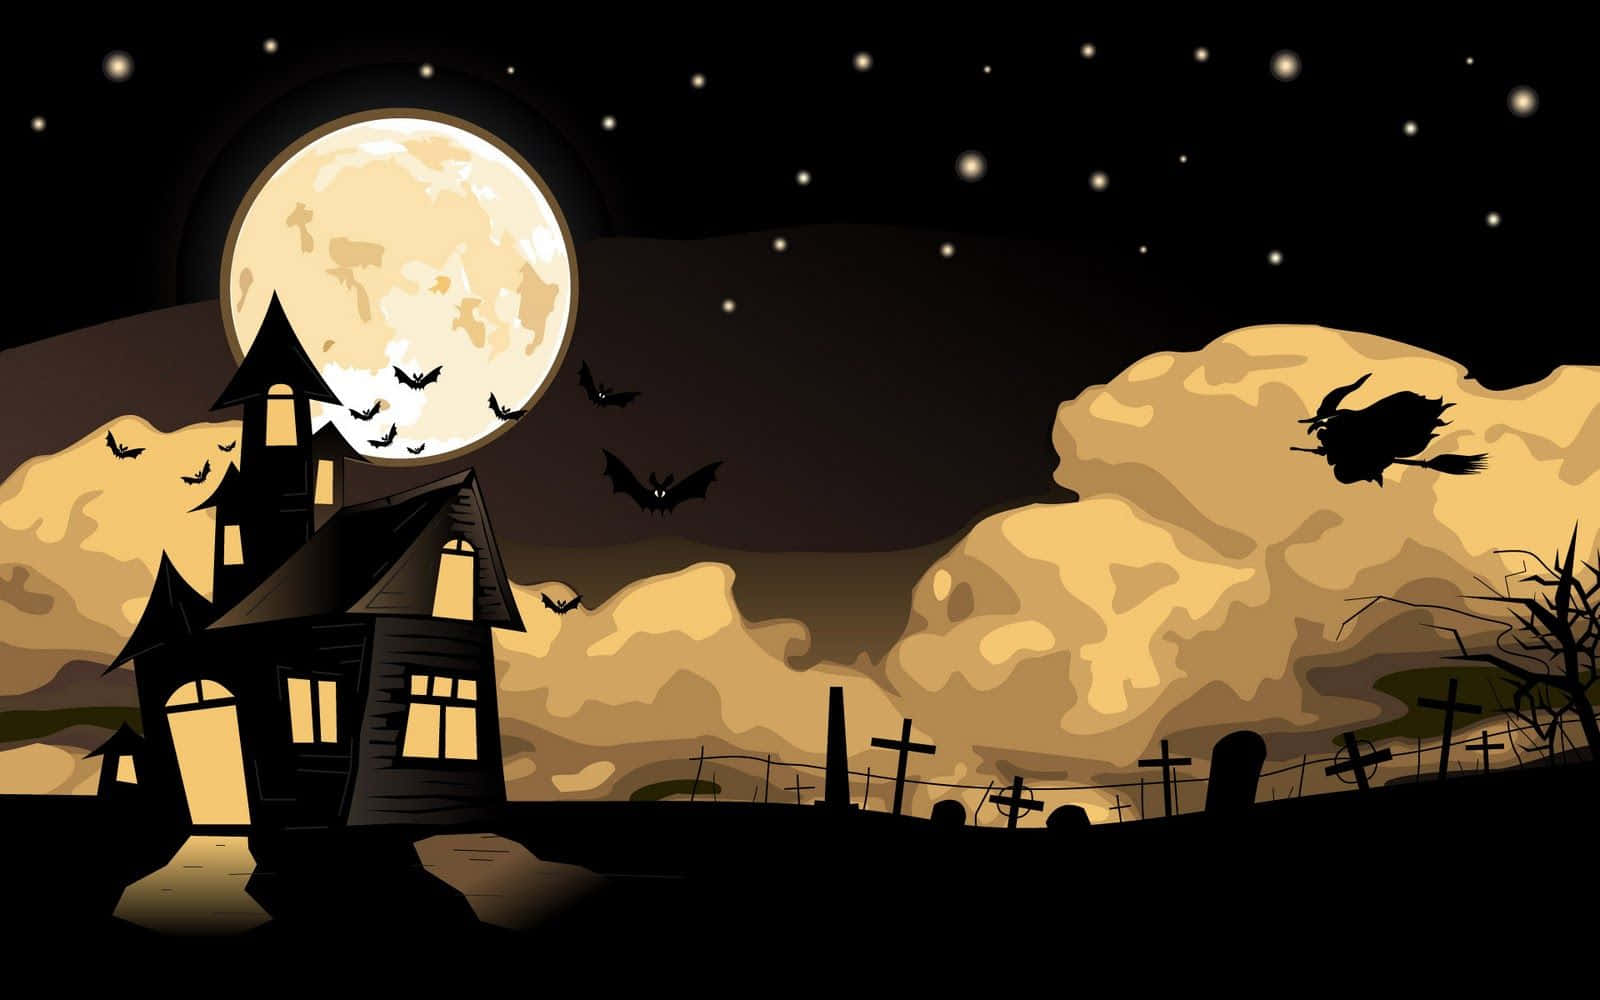 Get Into the Spirit of Halloween With a Spooky Animated Theme Wallpaper